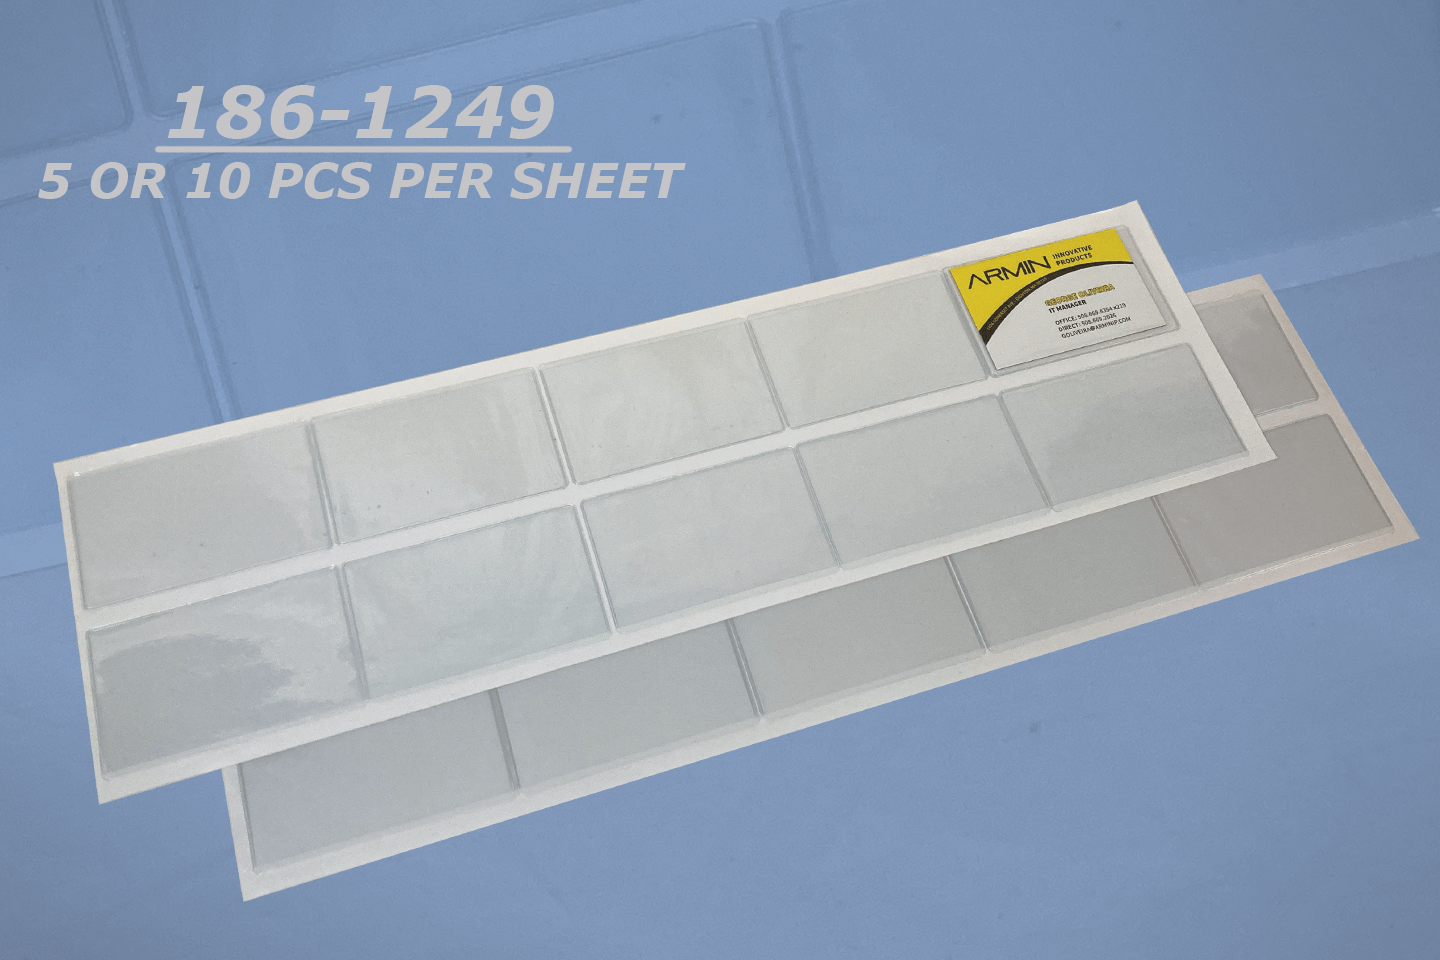 3 1/2" x 2" Adhesive Pouch - OPEN LONG